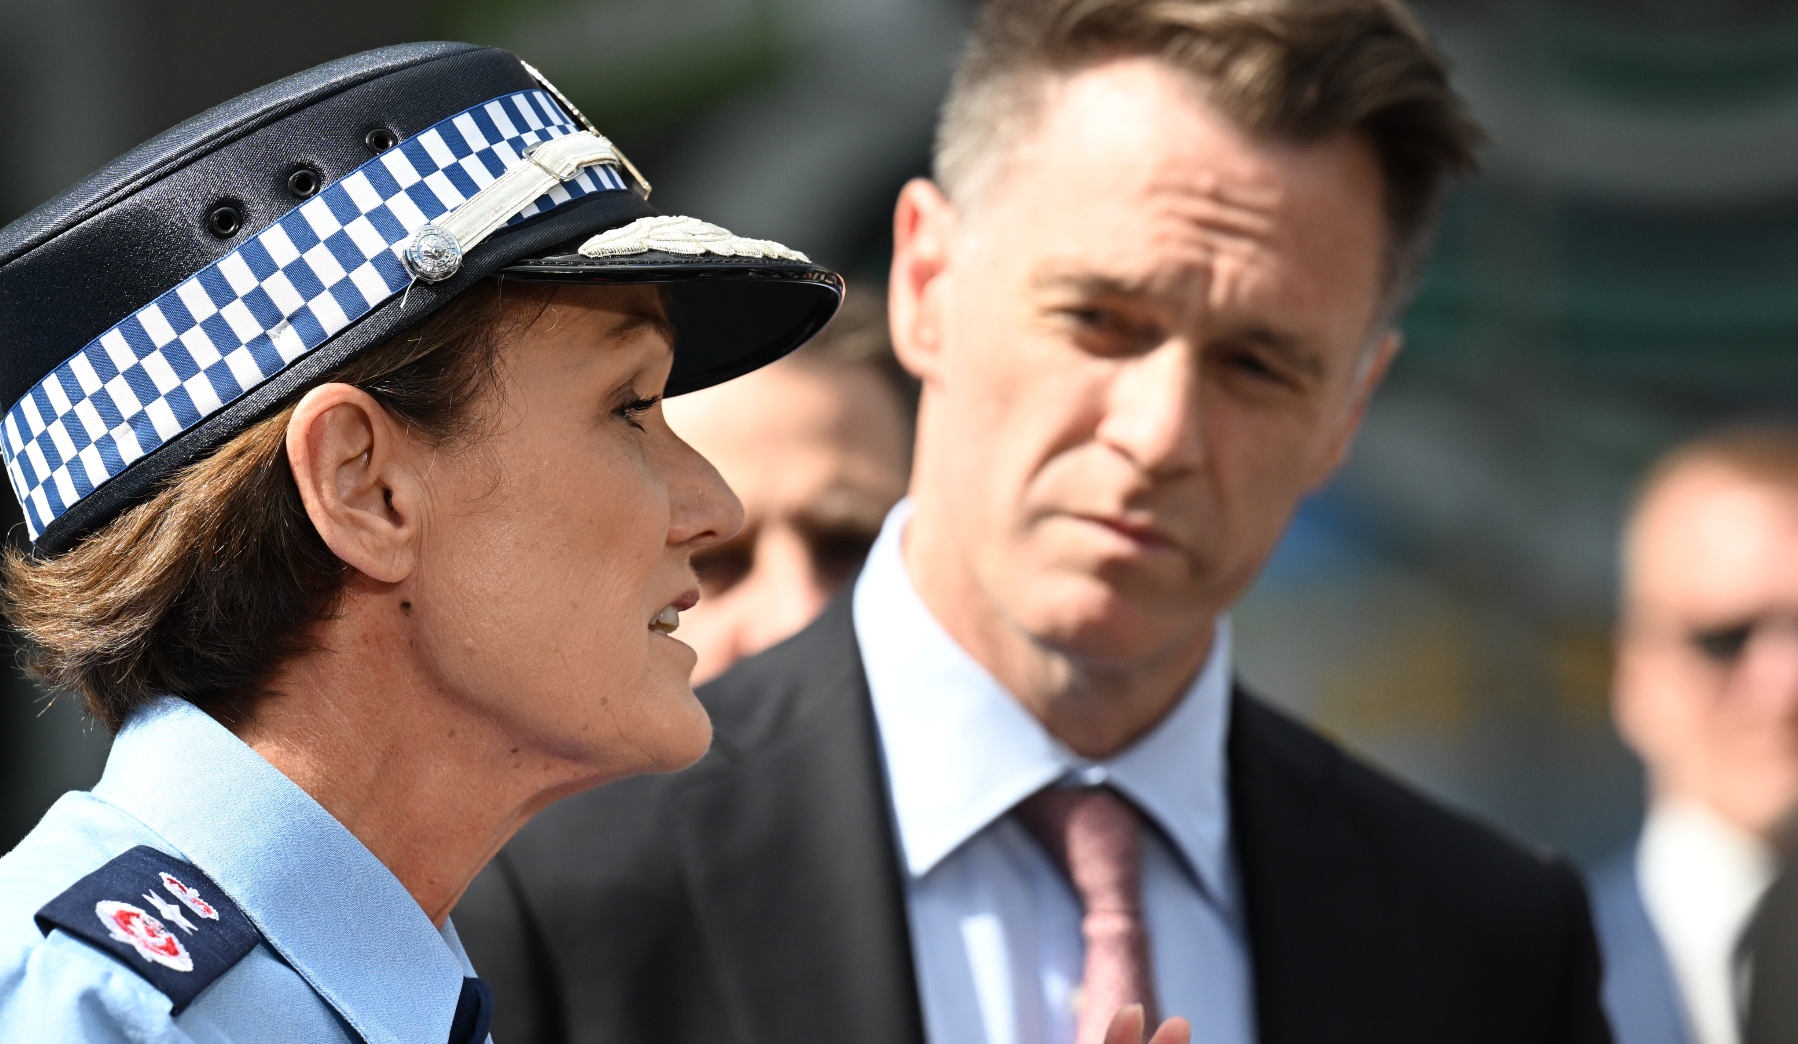 “Out of touch”: NSW Police want tougher knife crime penalties